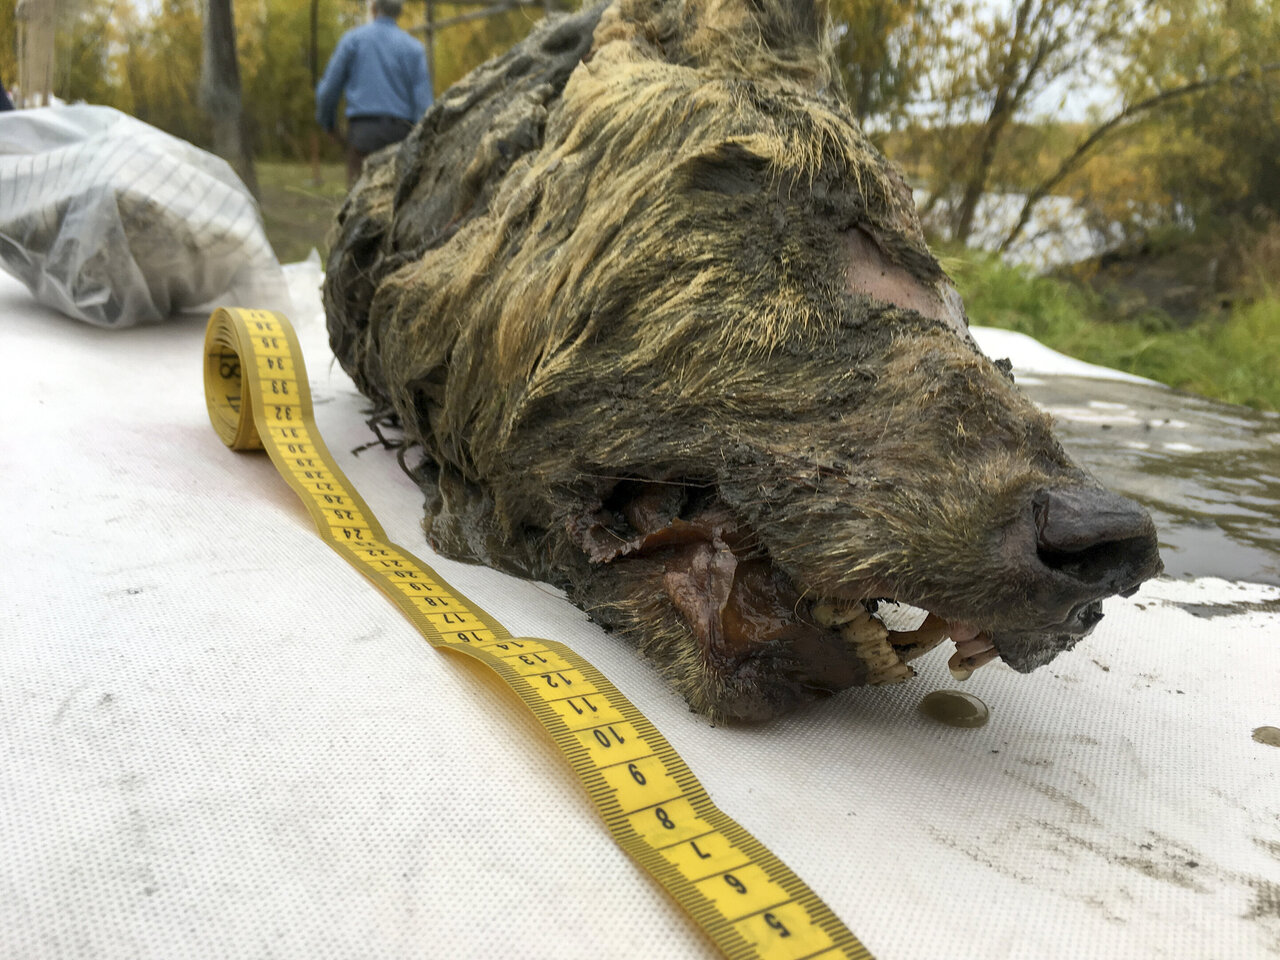 Perfectly preserved head of Ice Age wolf found in Siberia